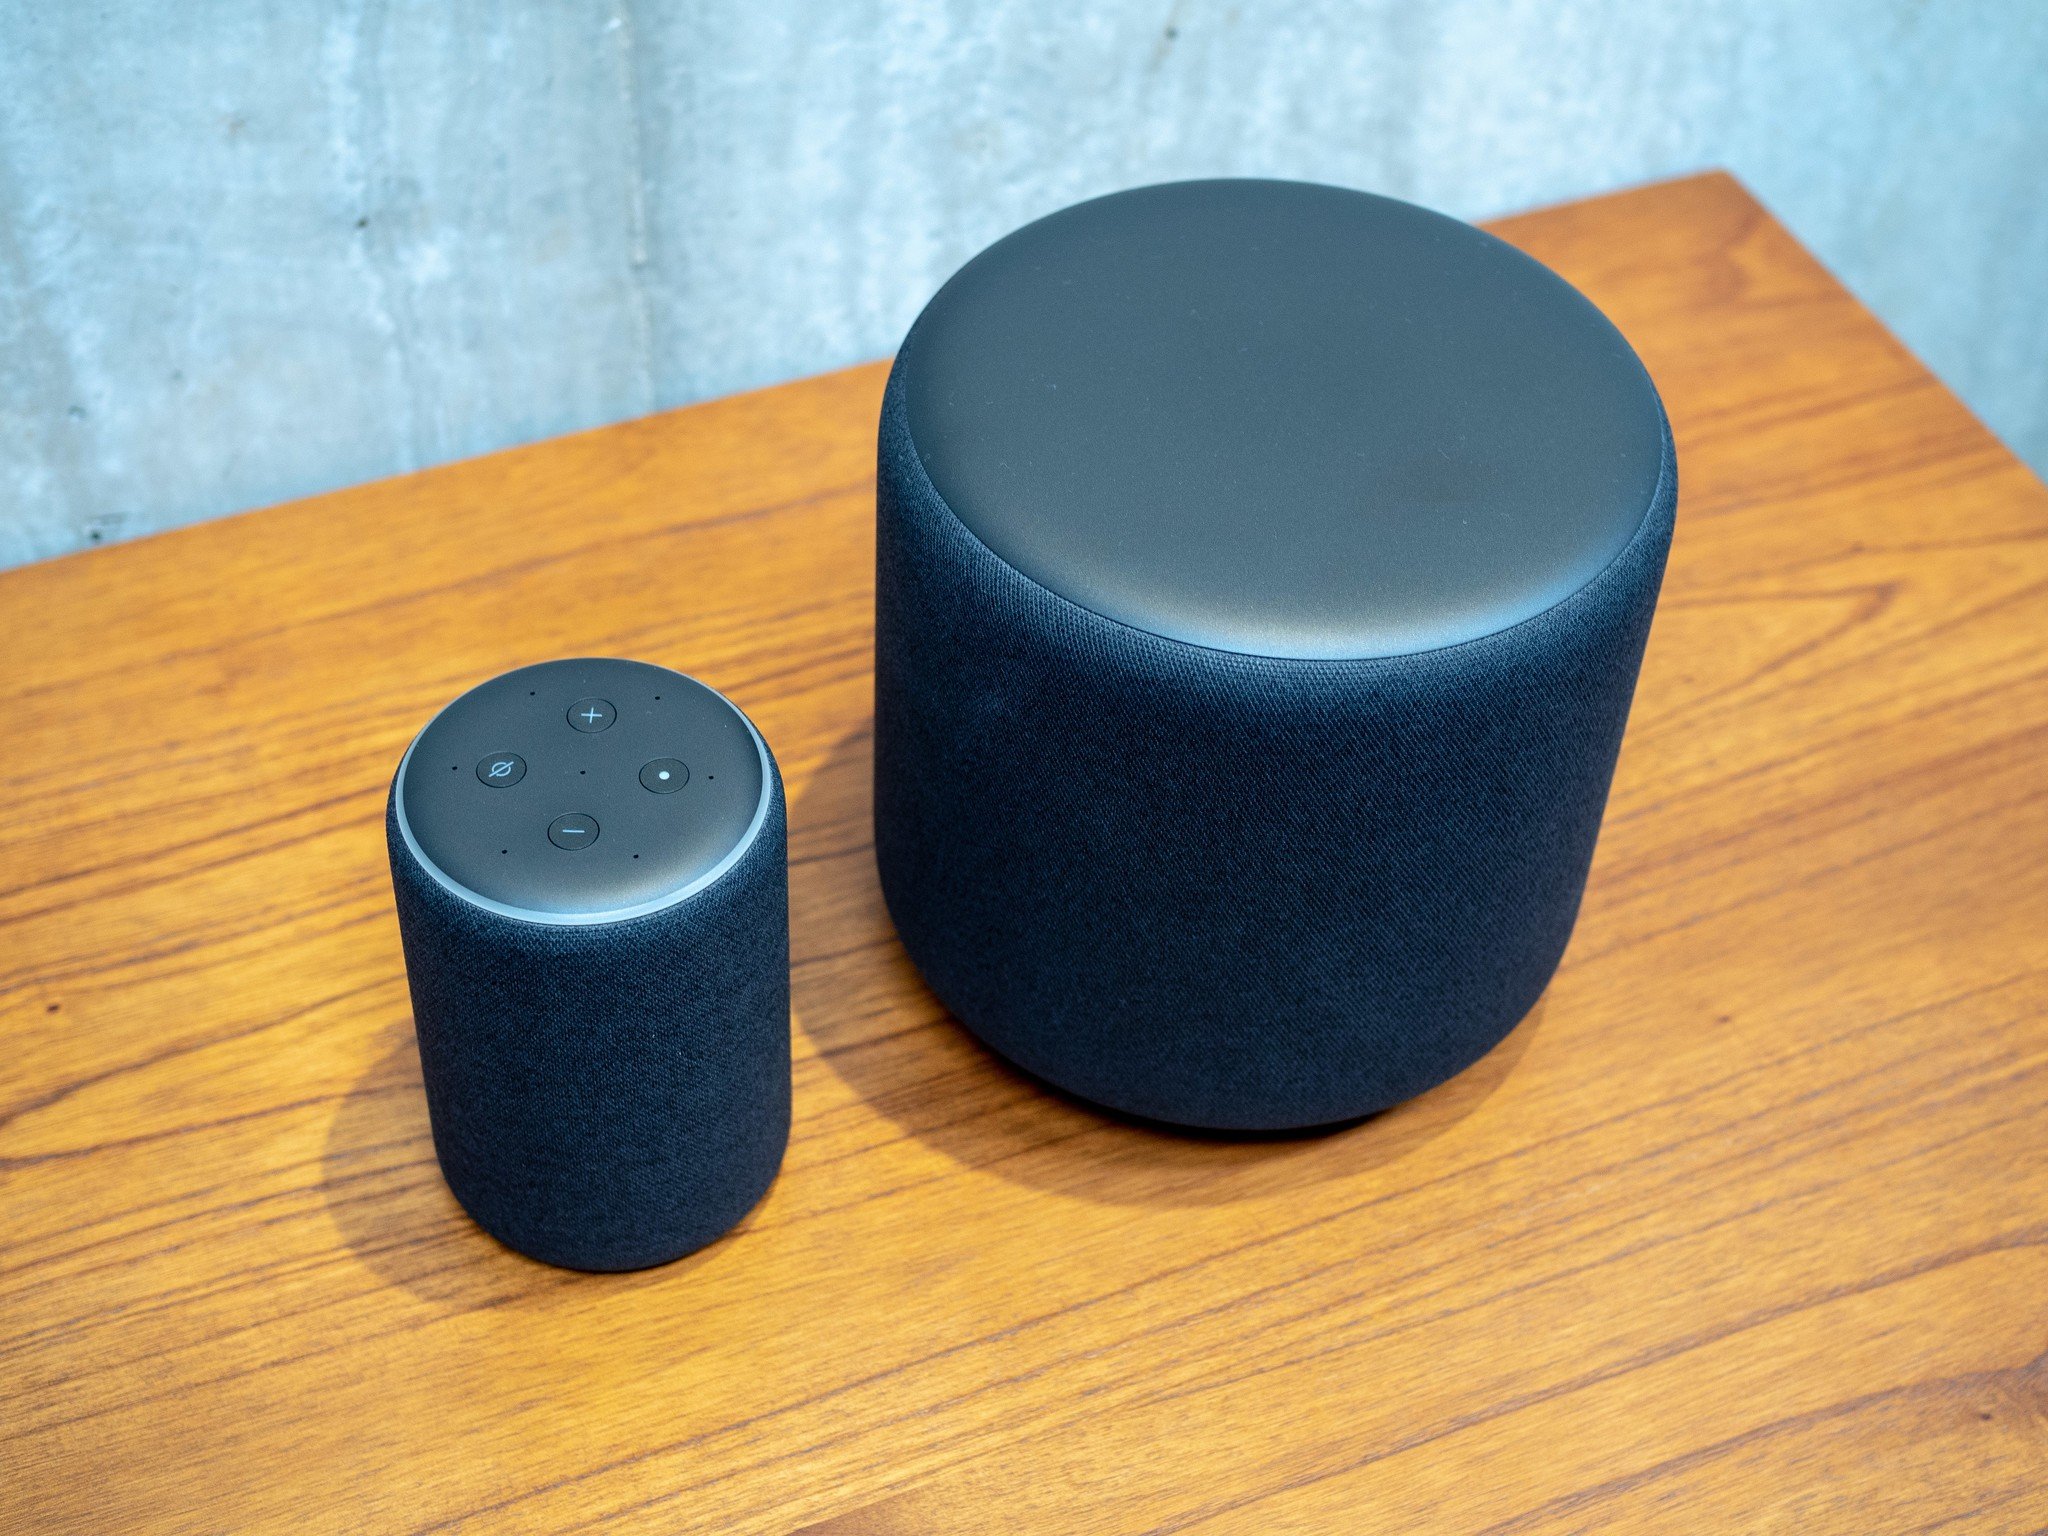 How to pair an Echo Sub to an  Echo speaker